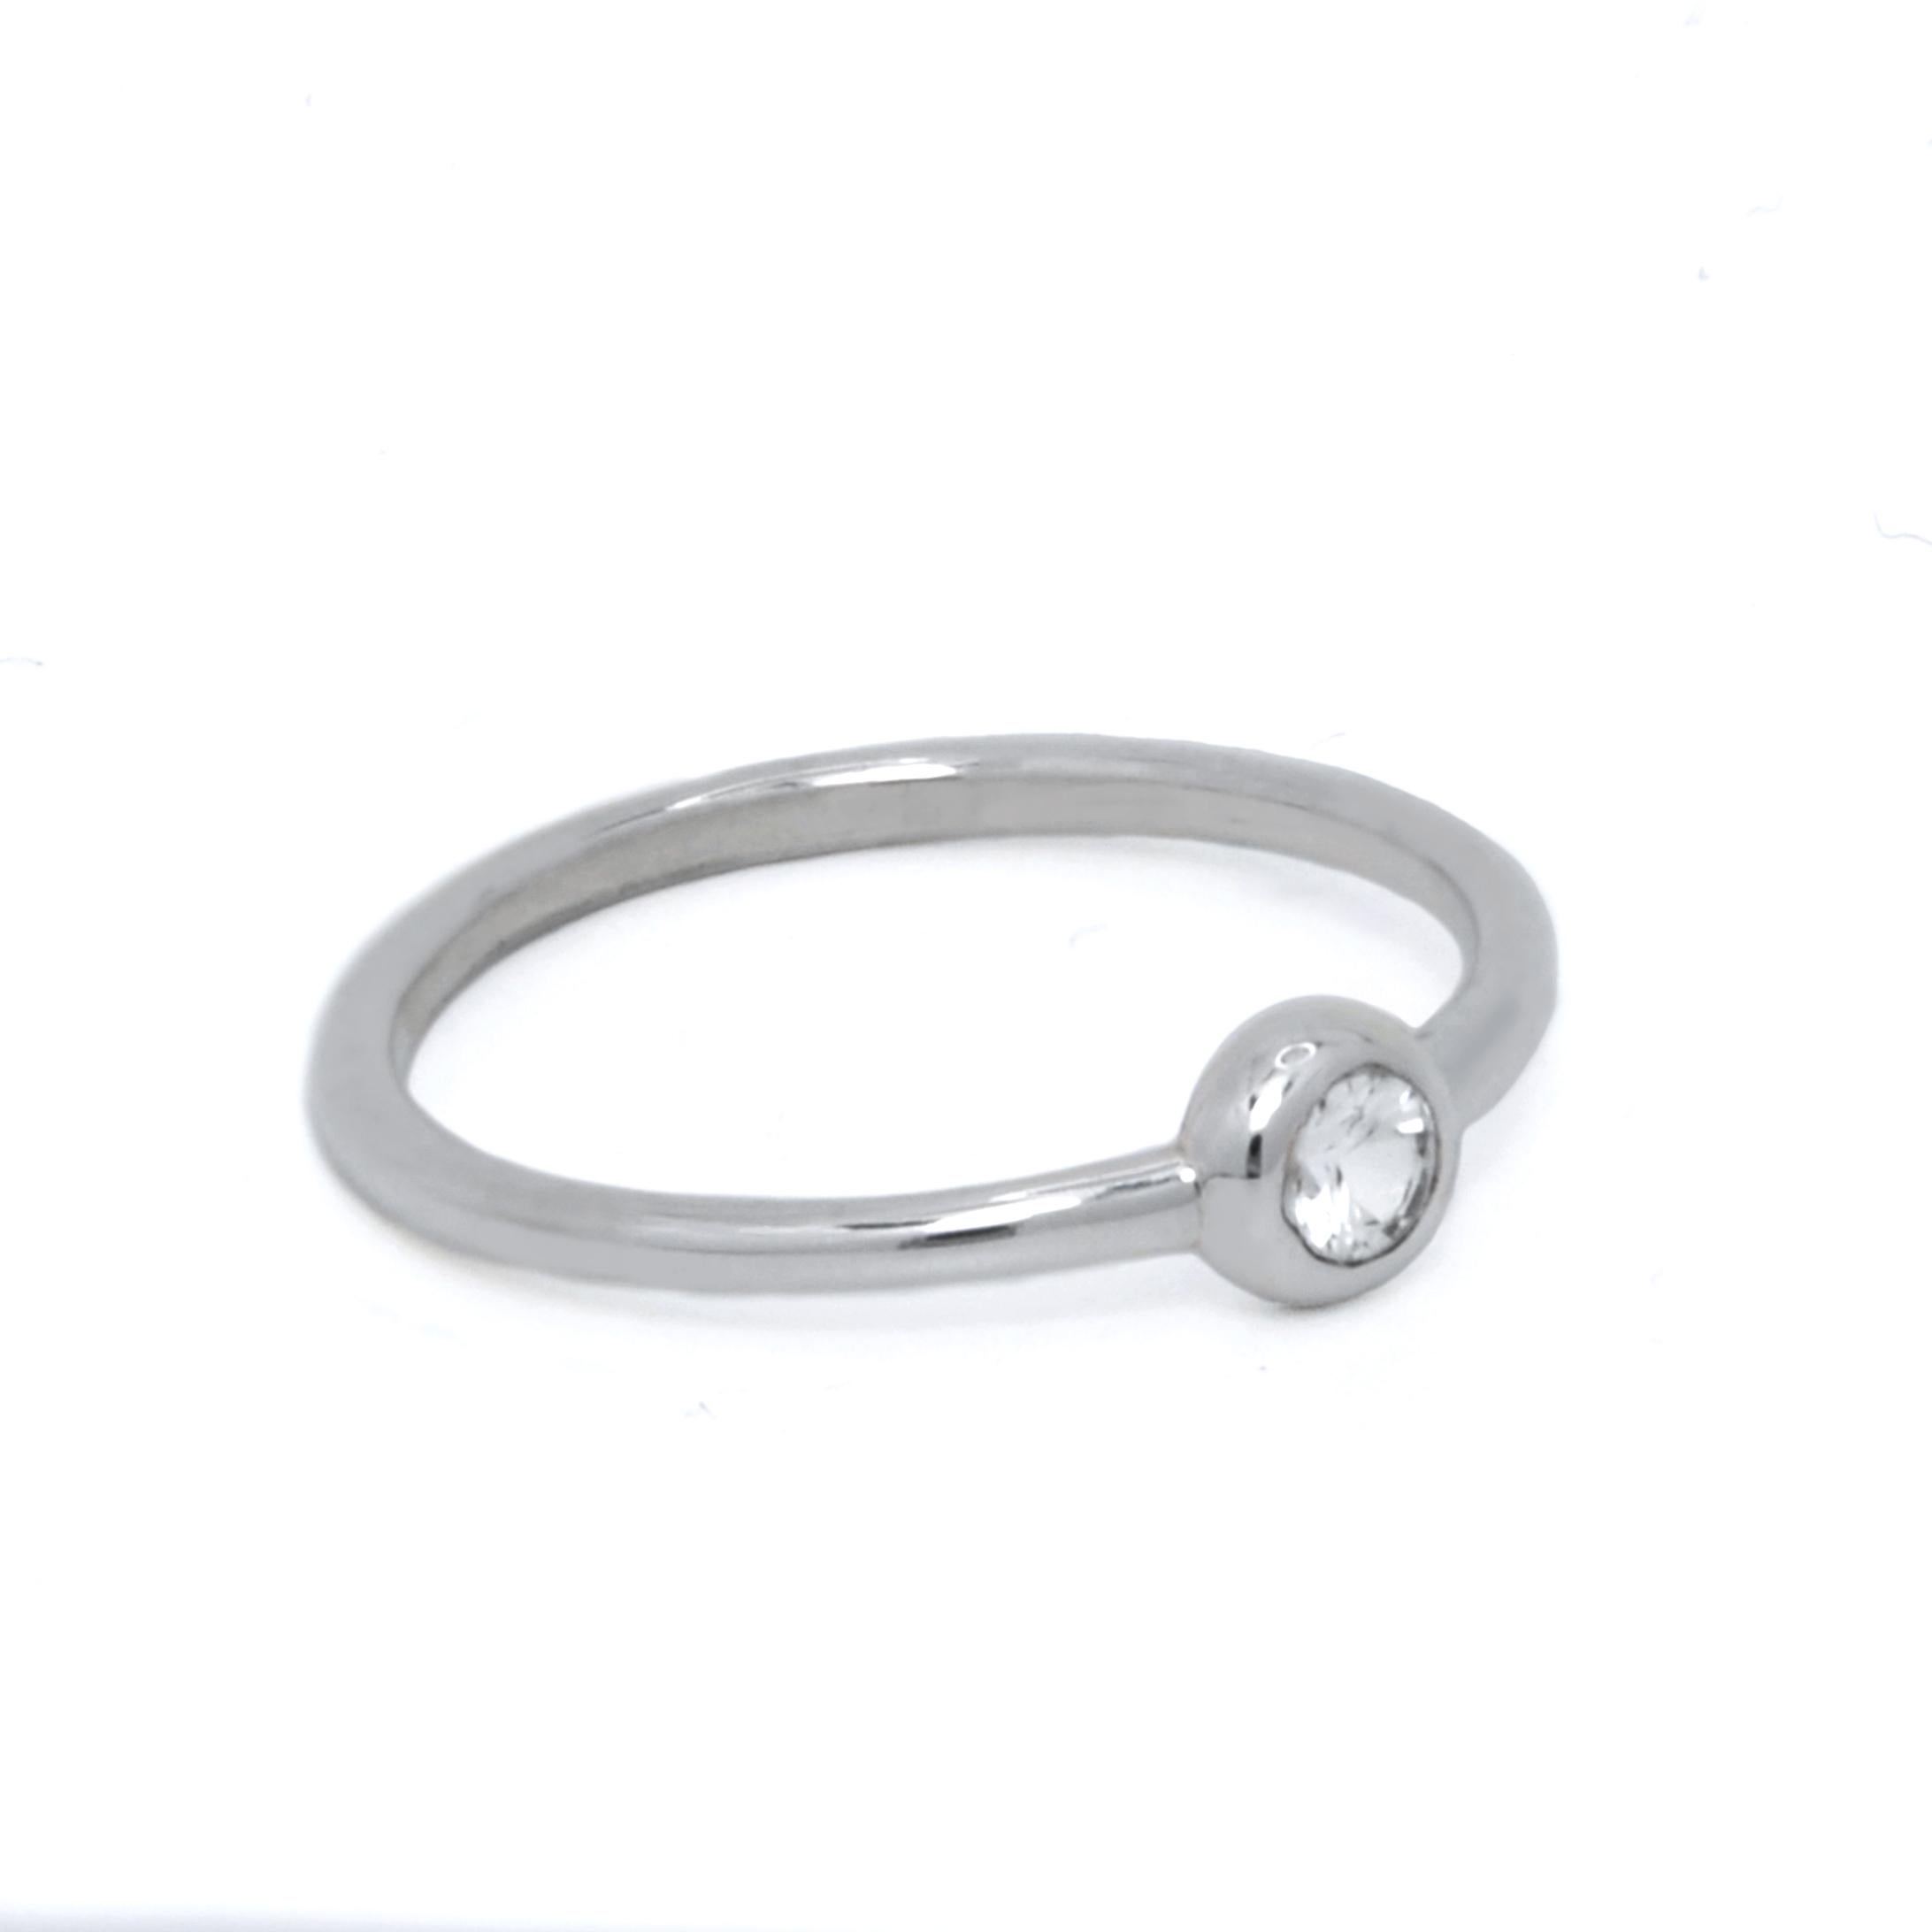 For Sale:  Ruth Nyc Ane Ring, Solitaire Diamond Ring in 14k White Gold 2